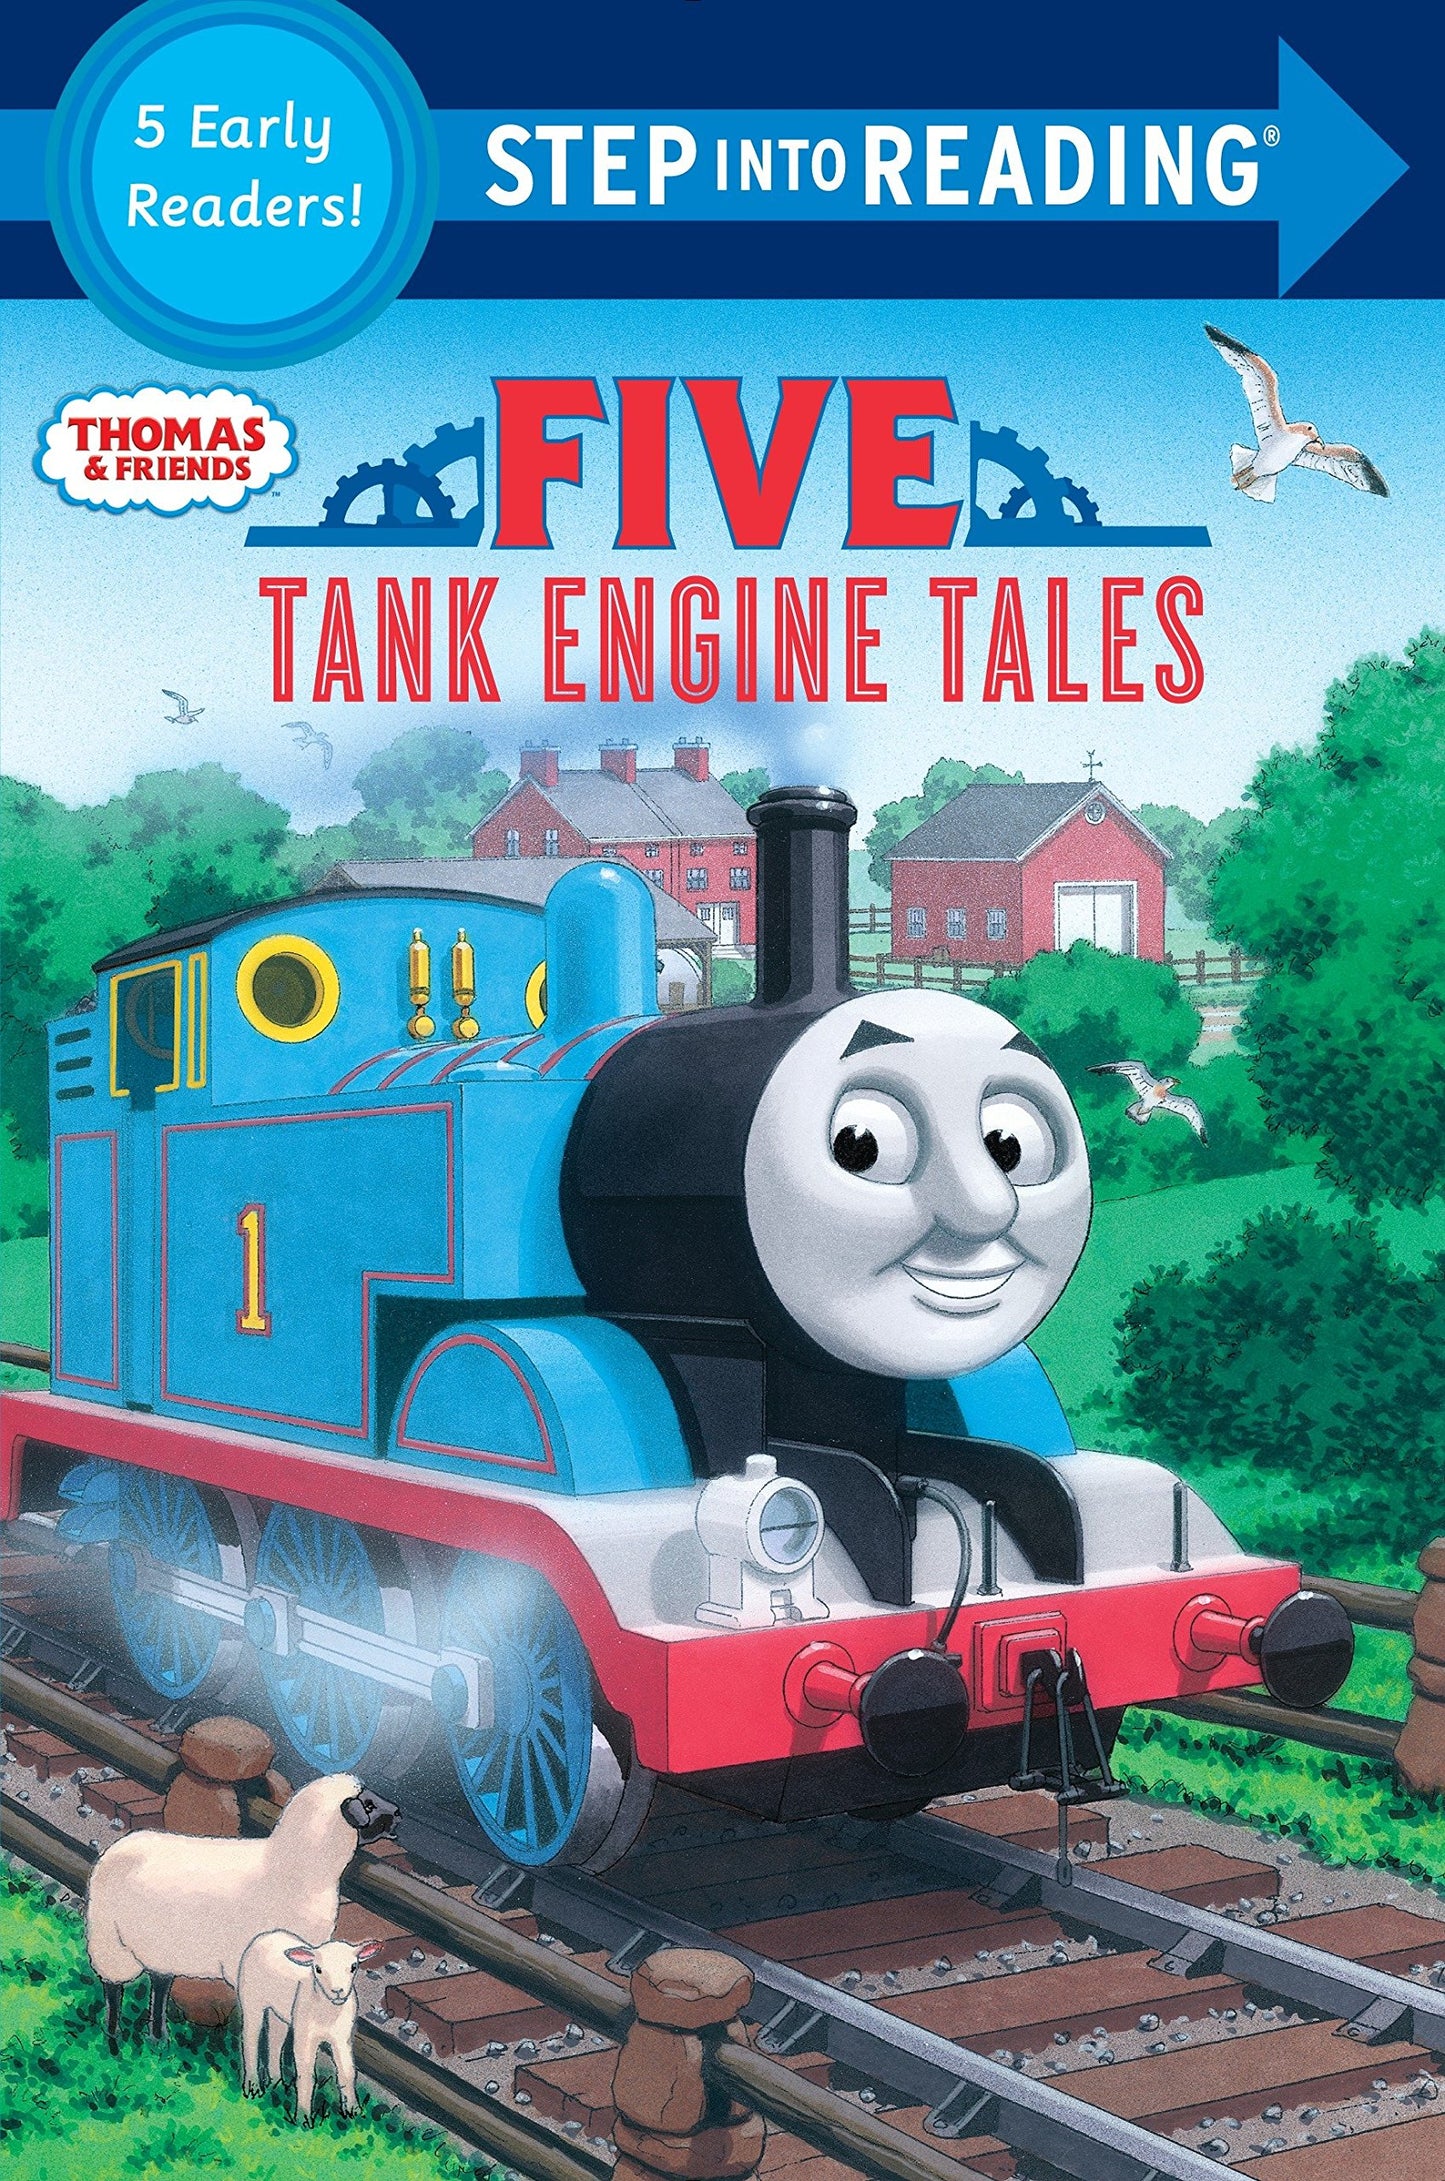 Five Tank Engine Tales (Thomas & Friends) (Step into Reading)